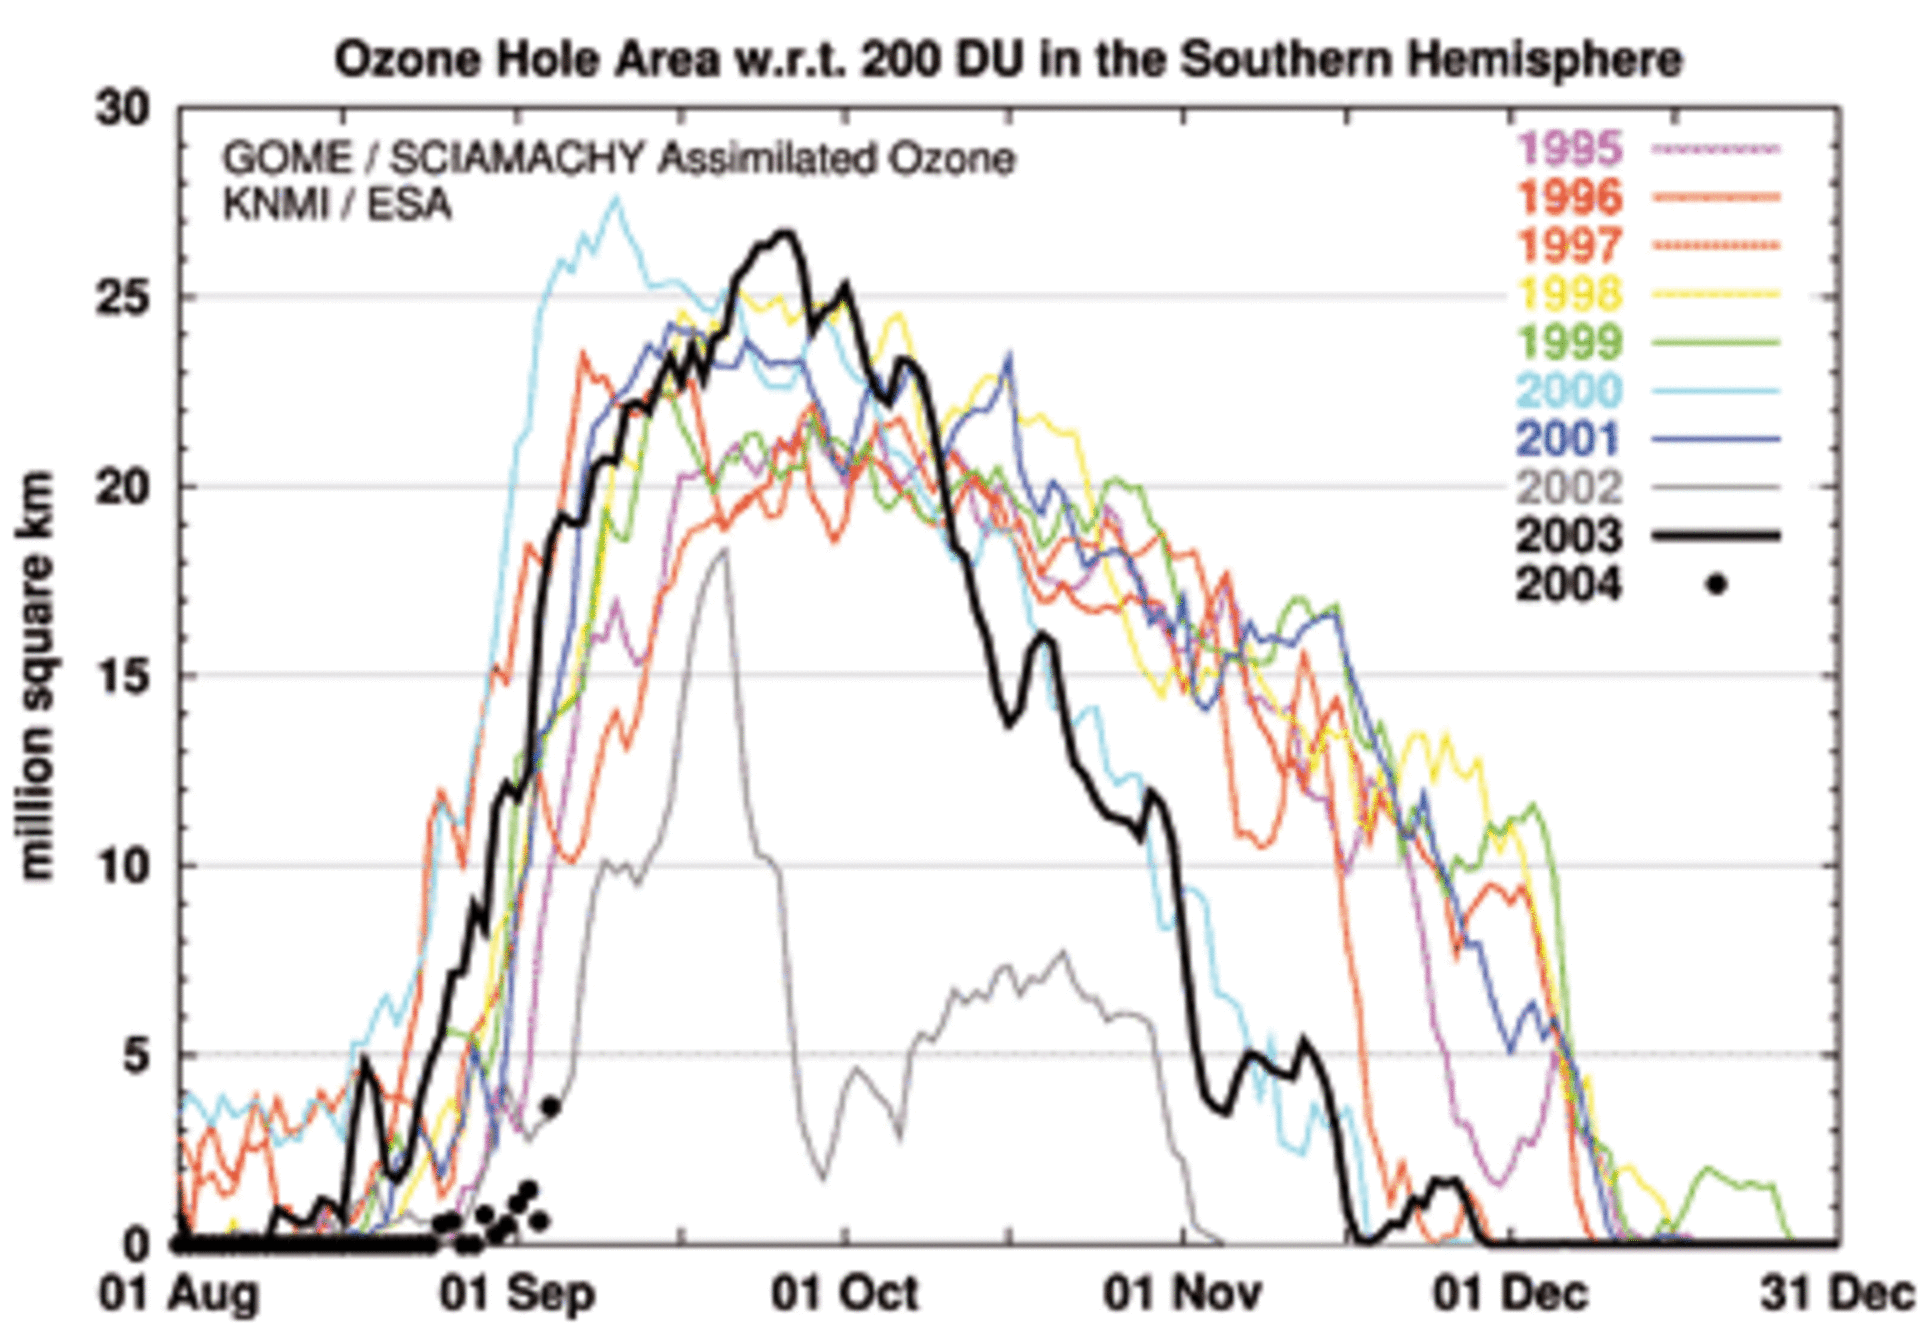 Annual ozone holes compared by area and duration